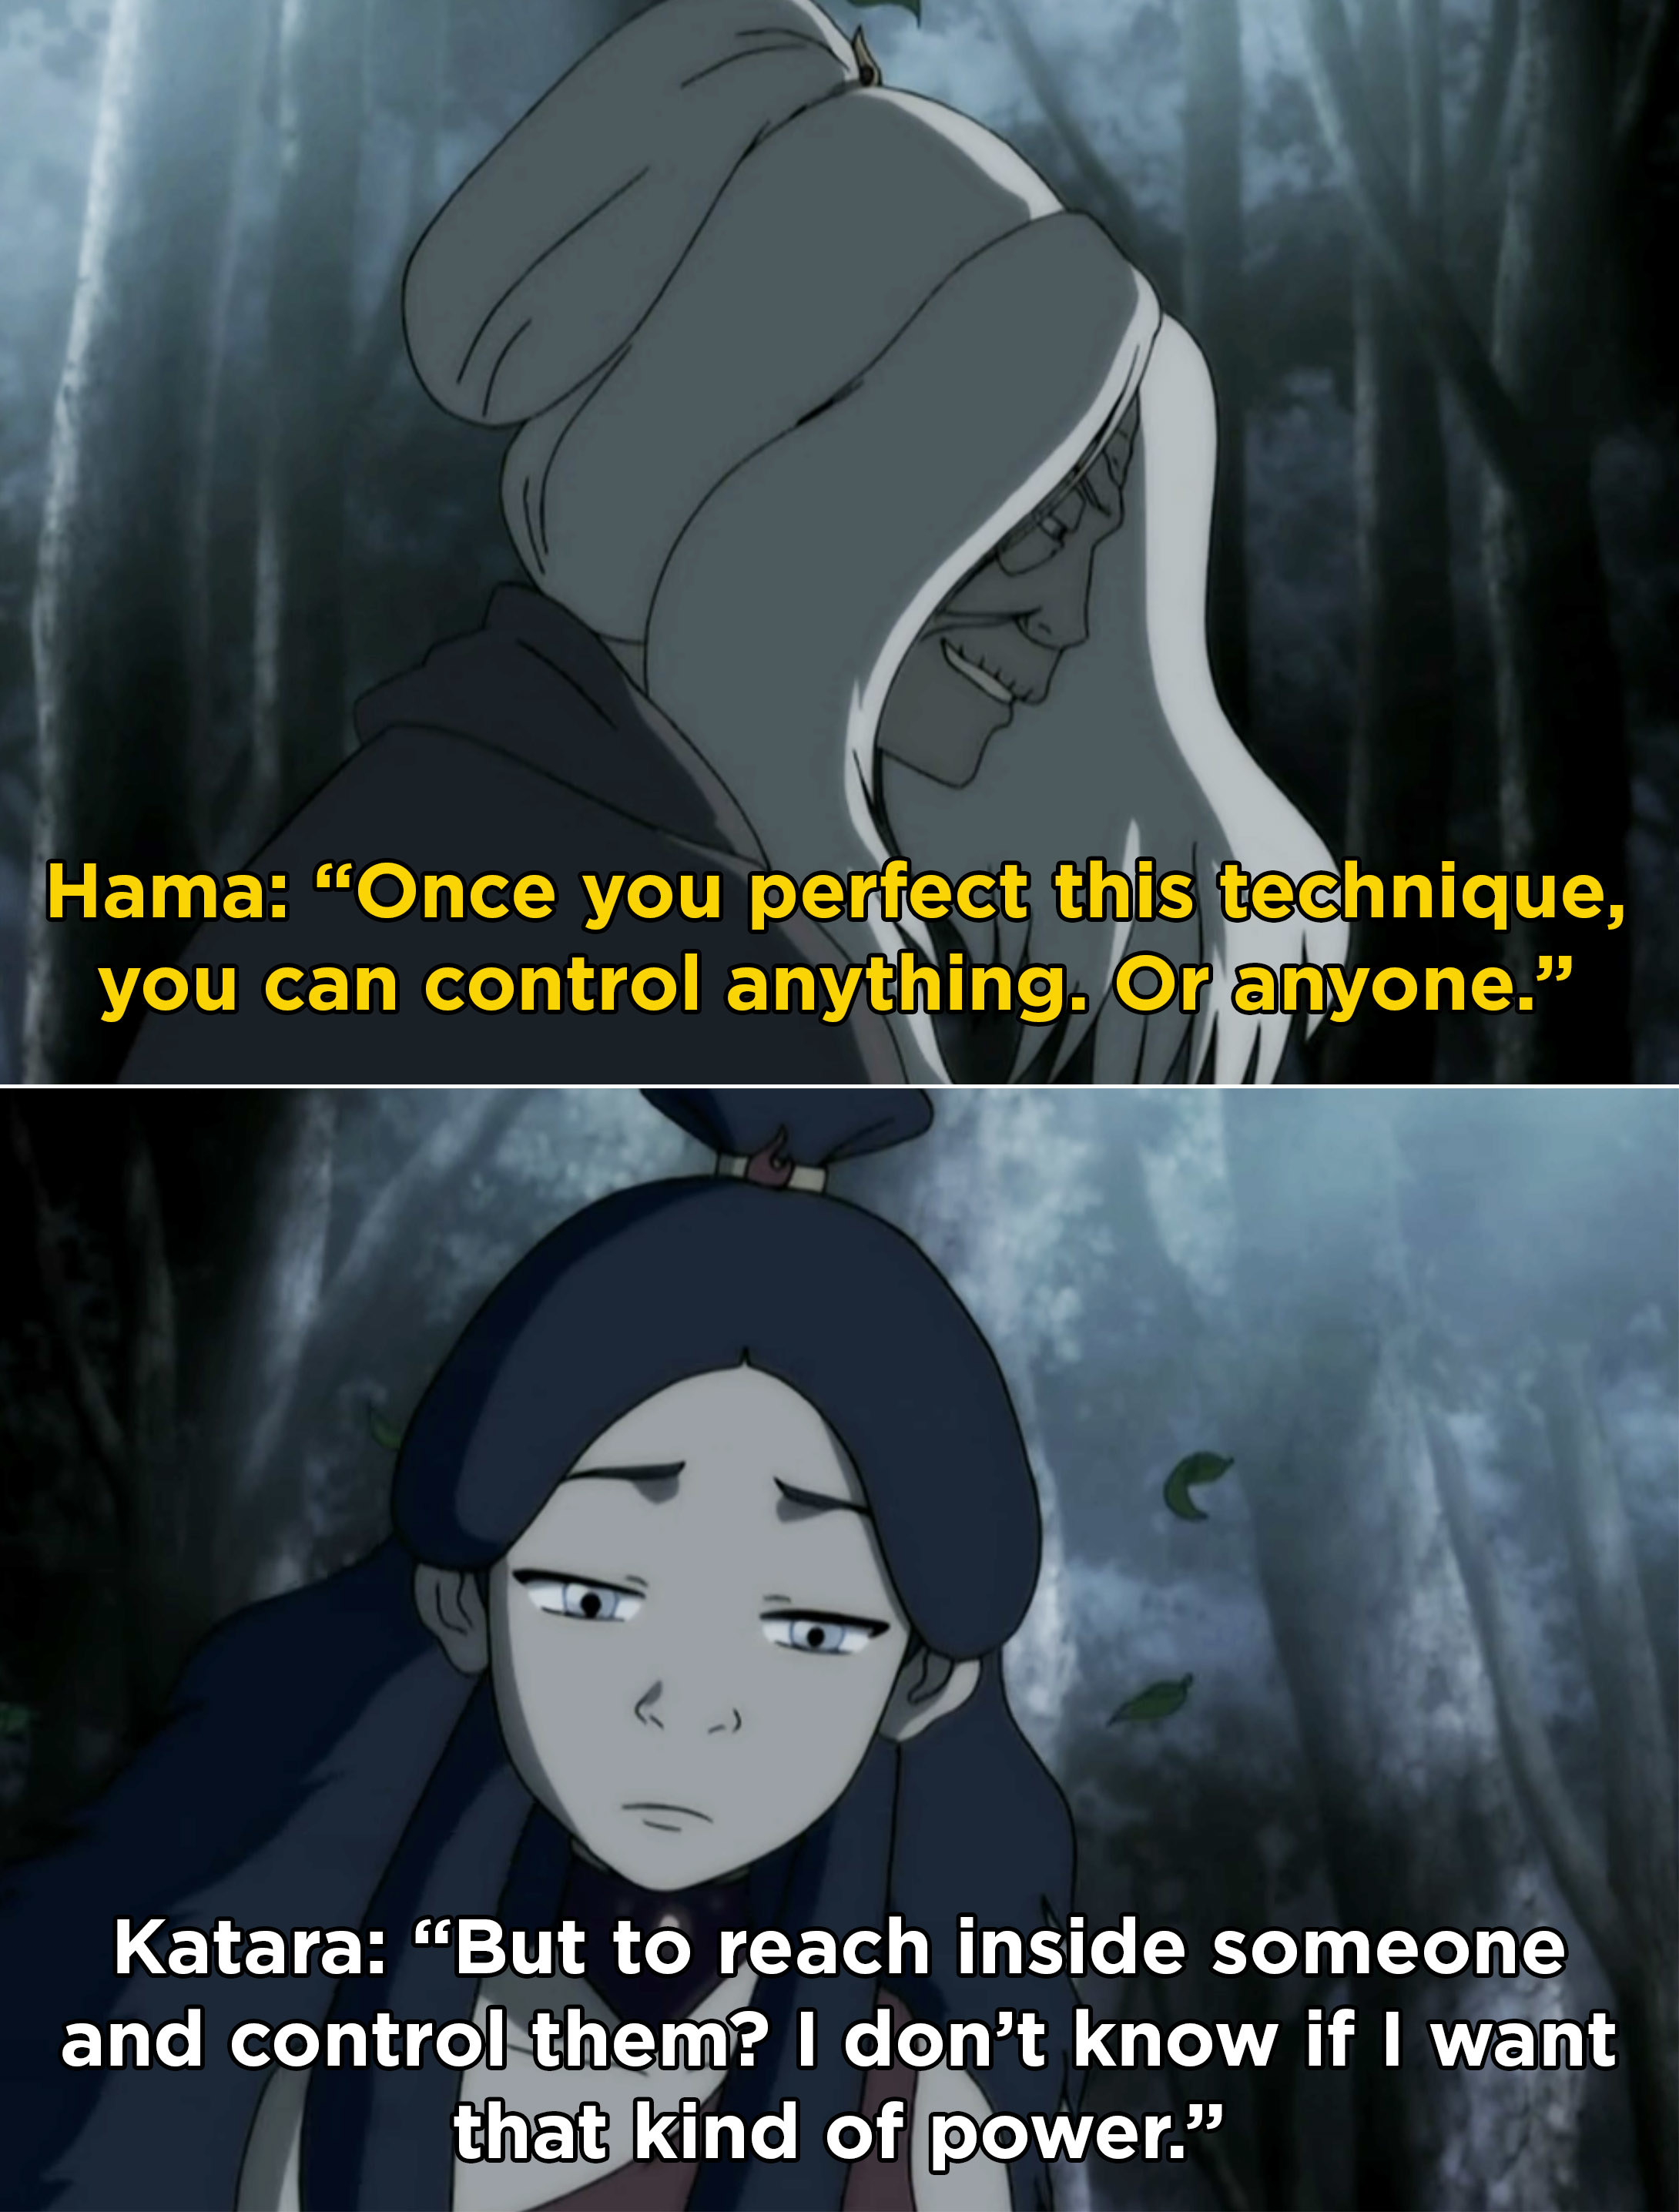 Hama telling Katara that once she masters this technique she can control anything or anyone